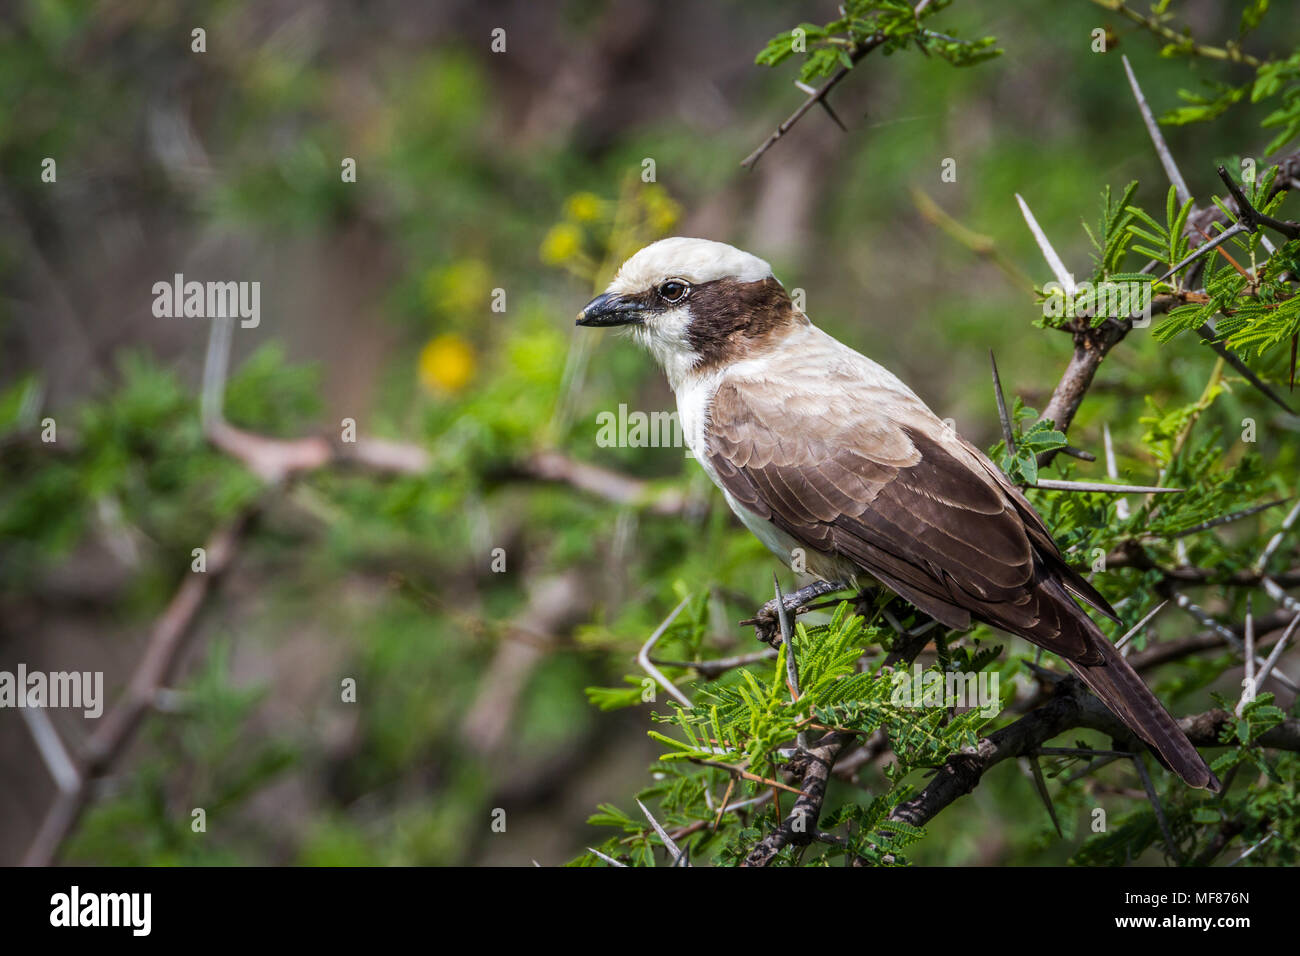 White-crowned shrike in Kruger national park, South Africa ; Specie Eurocephalus anguitimens family of Laniidae Stock Photo